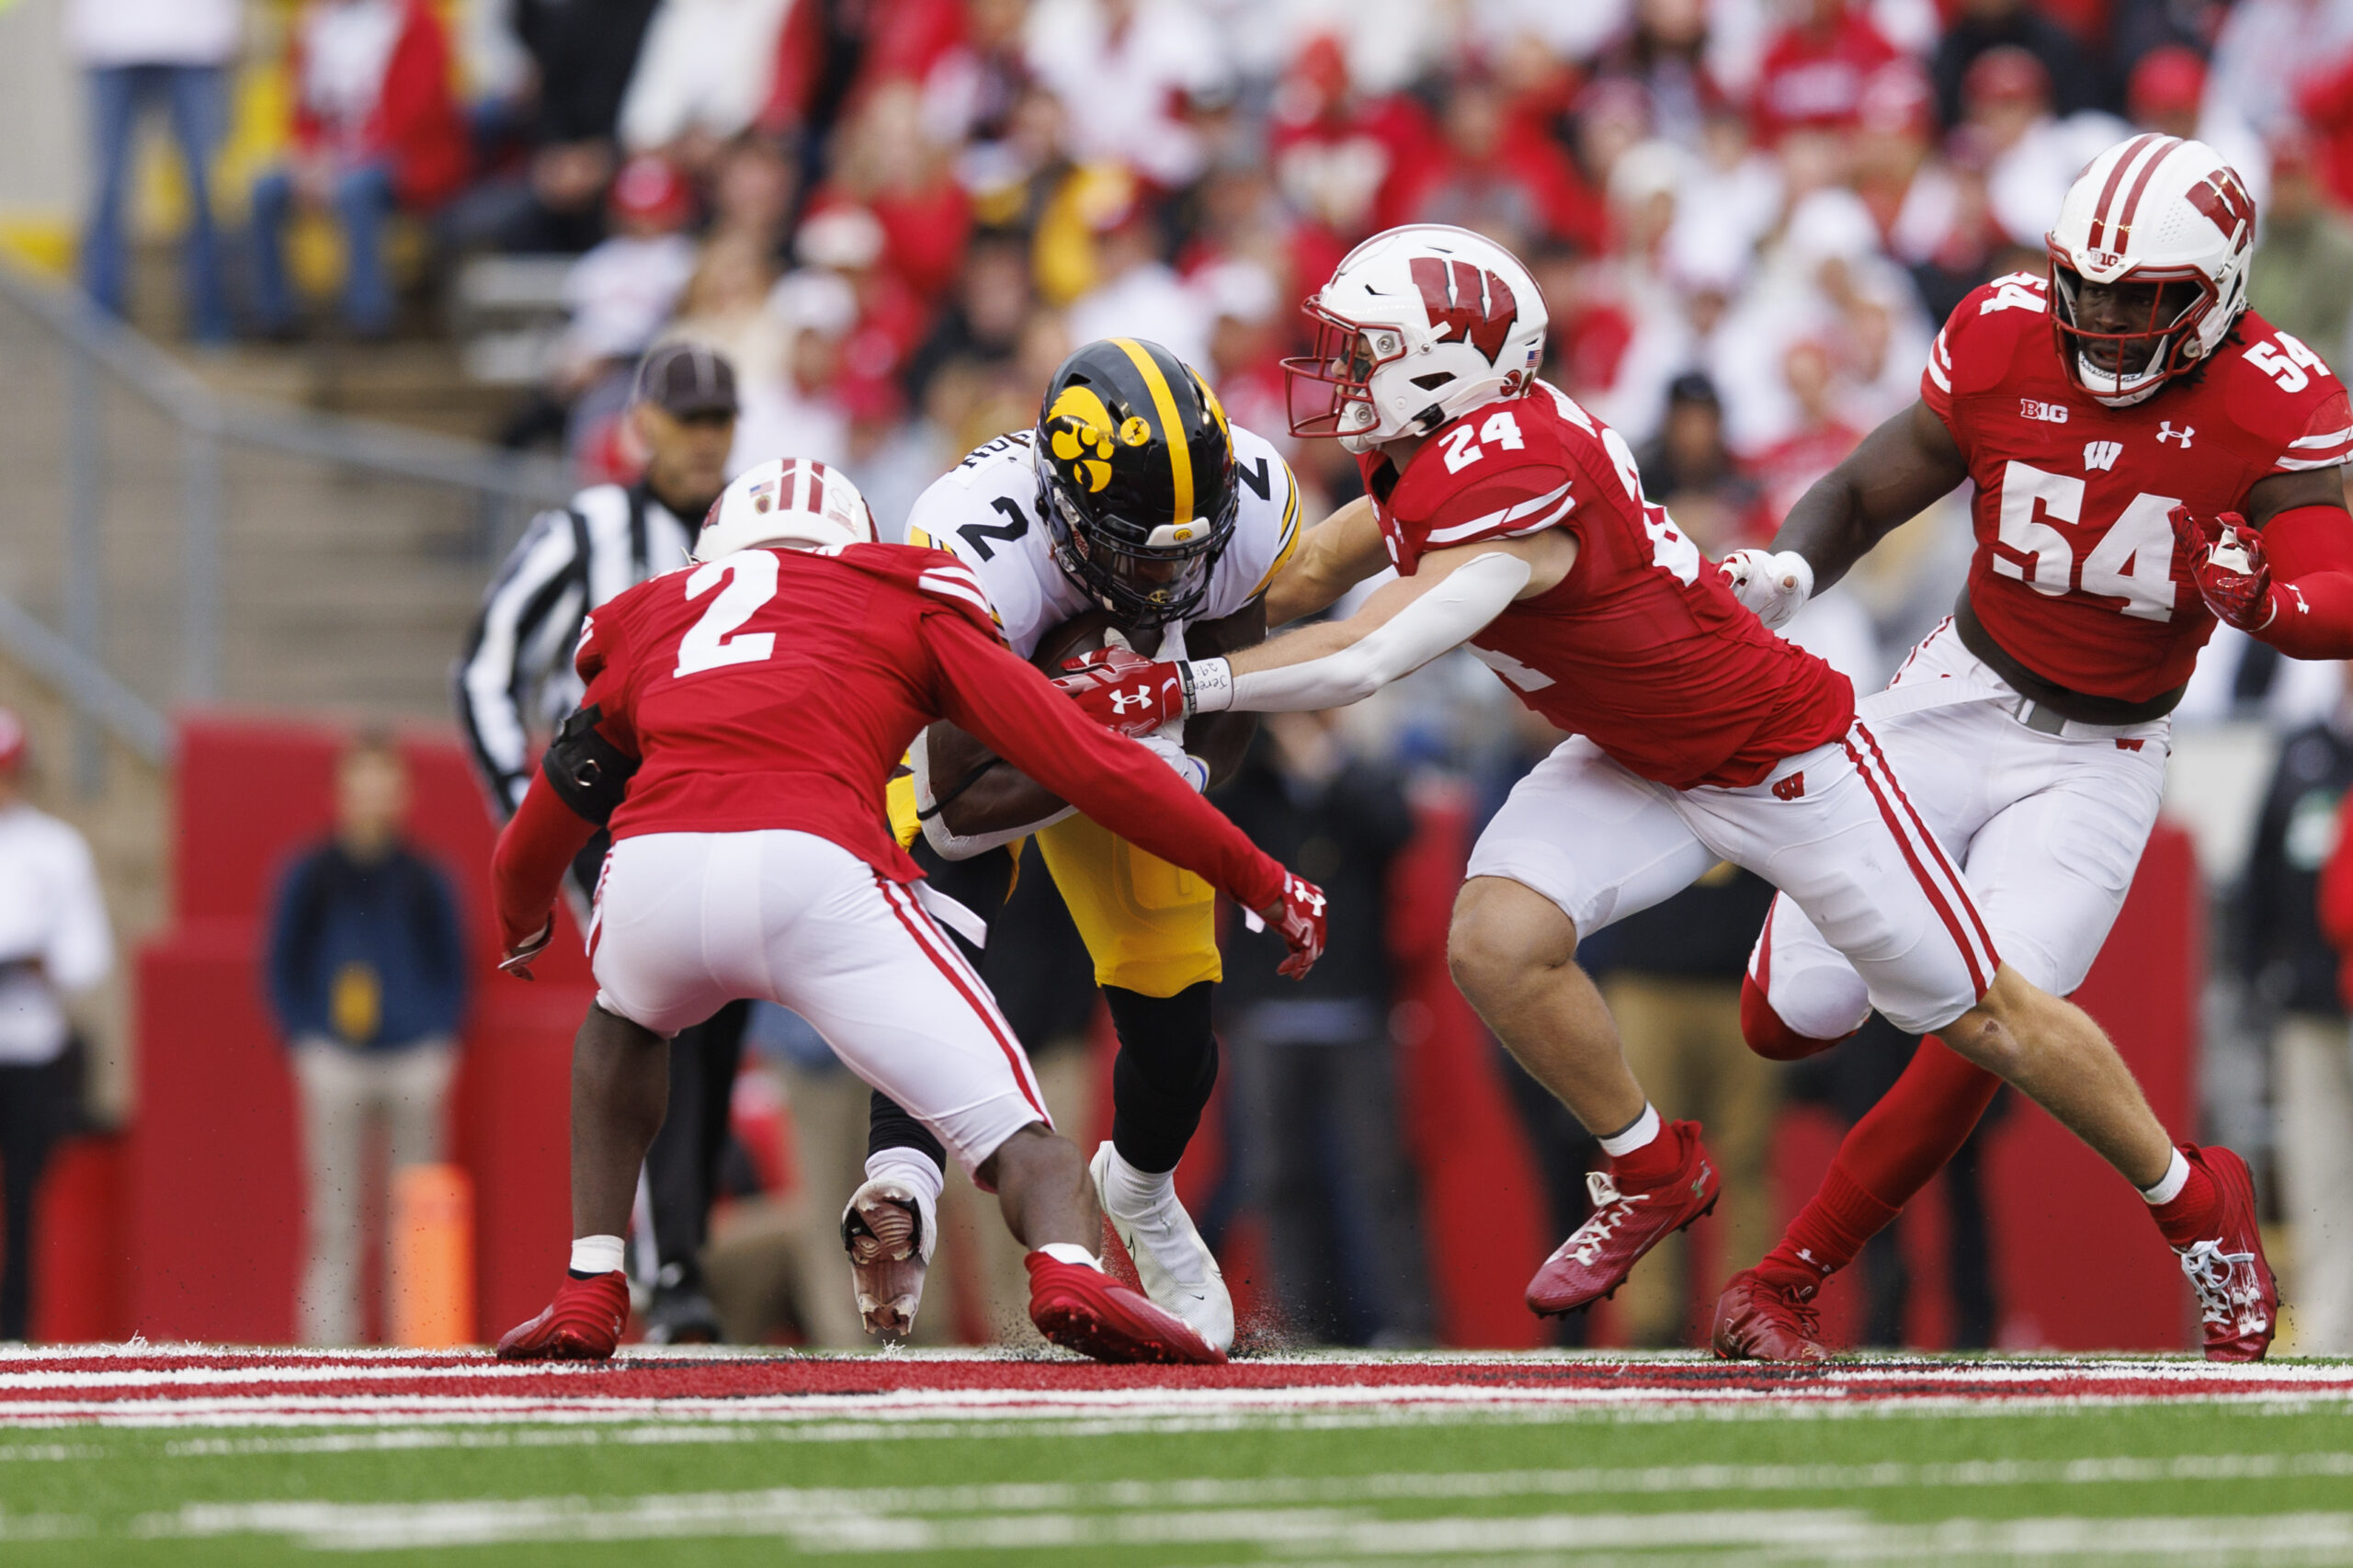 Wisconsin football; Badgers lose to Iowa